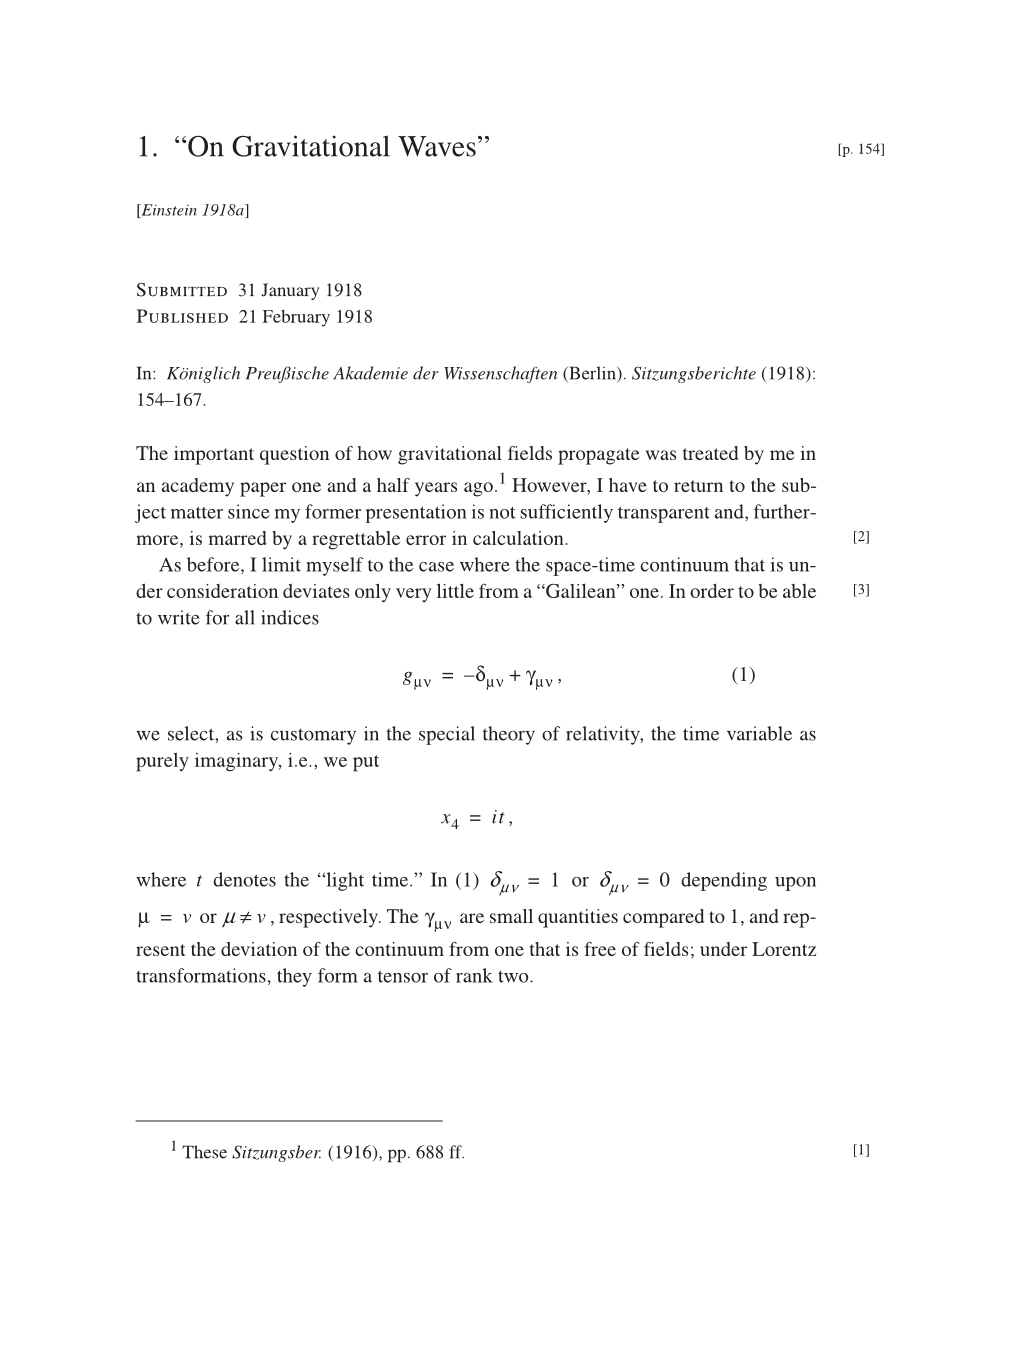 Volume 7: The Berlin Years: Writings, 1918-1921 (English translation supplement) page 9